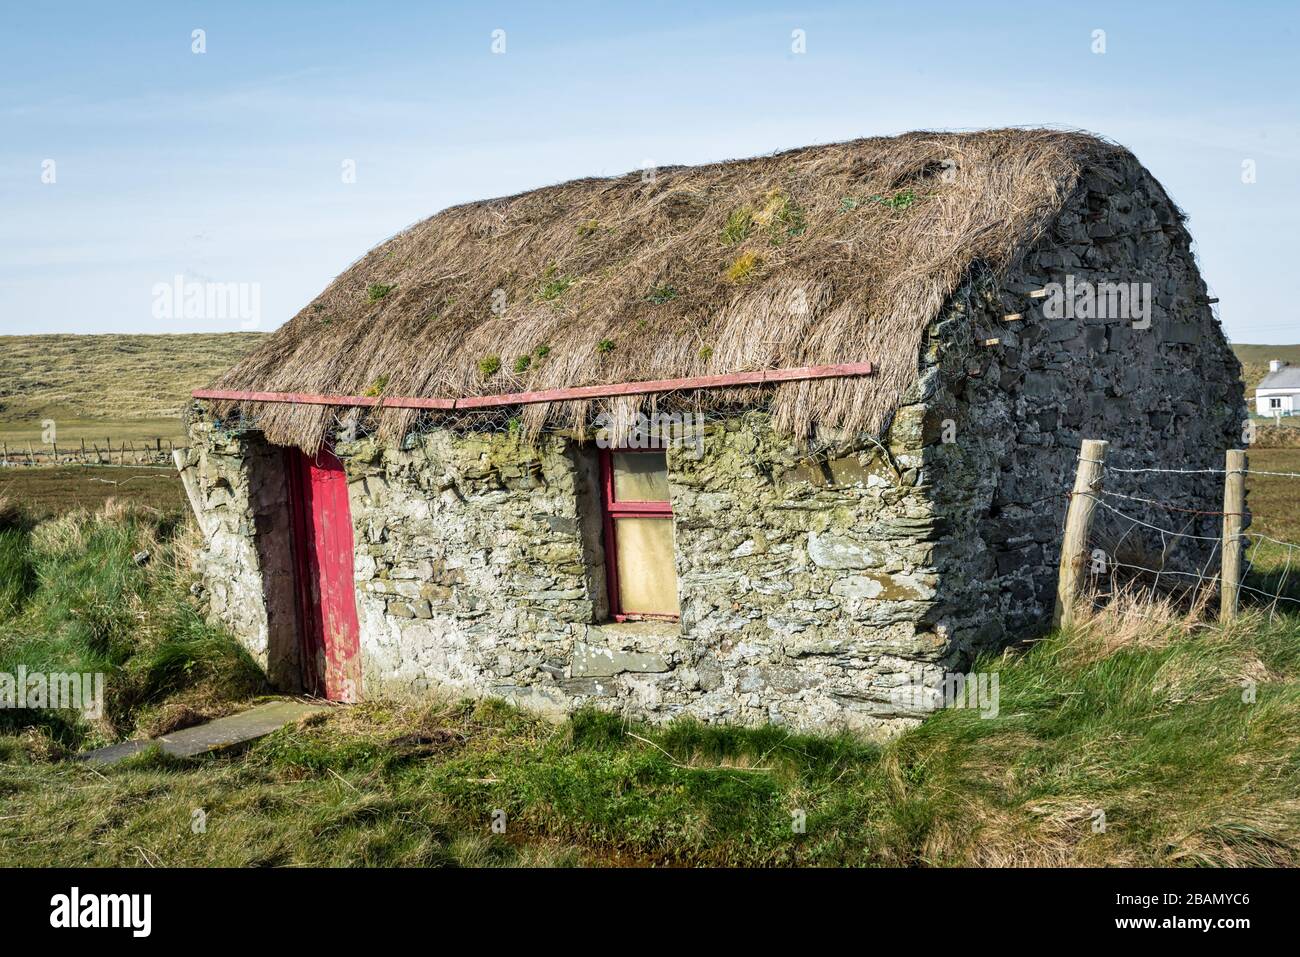 Donegal, Ireland - Mar 22, 2020: This is an old abandon thatched cottage in Donegal Ireland Stock Photo